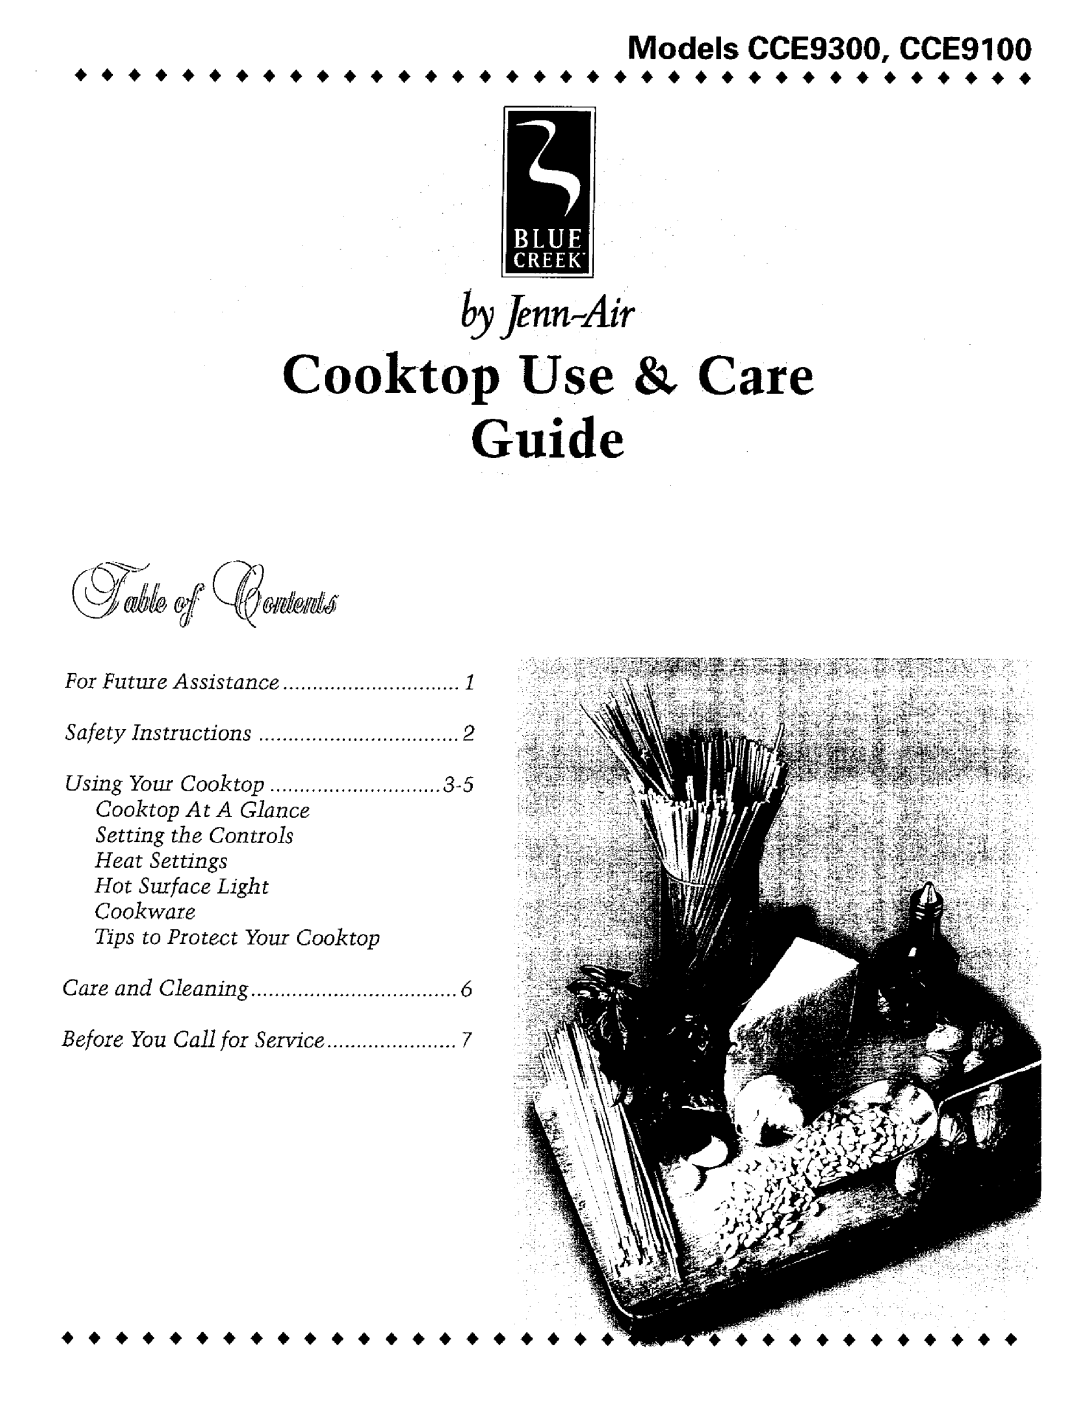 Jenn-Air manual byfenn Air, Cooktop Use & Care Guide, Models CCE9300, CCE9100 